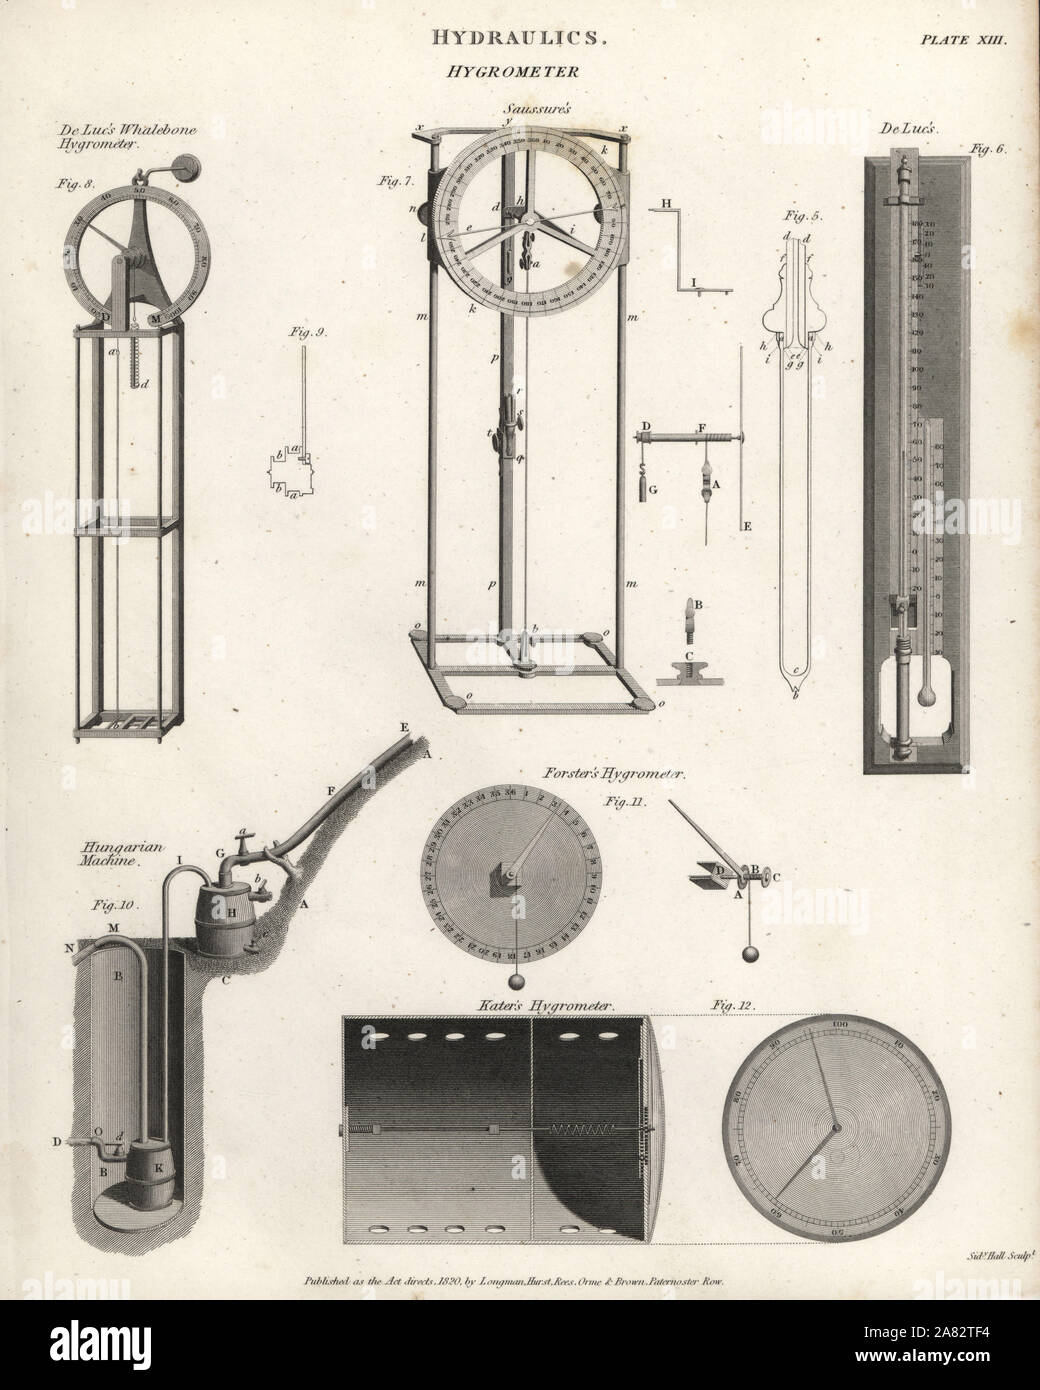 Types of hygrometers, 18th century, to measure moisture content. Jean-Andre De Luc's whalebone hygrometer, and others by Horace-Benedict de Saussure, Benjamin Meggot Forster, Henry Kater and the Hungarian Machine. Copperplate engraving by Sidney Hall from Abraham Rees' Cyclopedia or Universal Dictionary of Arts, Sciences and Literature, Longman, Hurst, Rees, Orme and Brown, London, 1820. Stock Photo